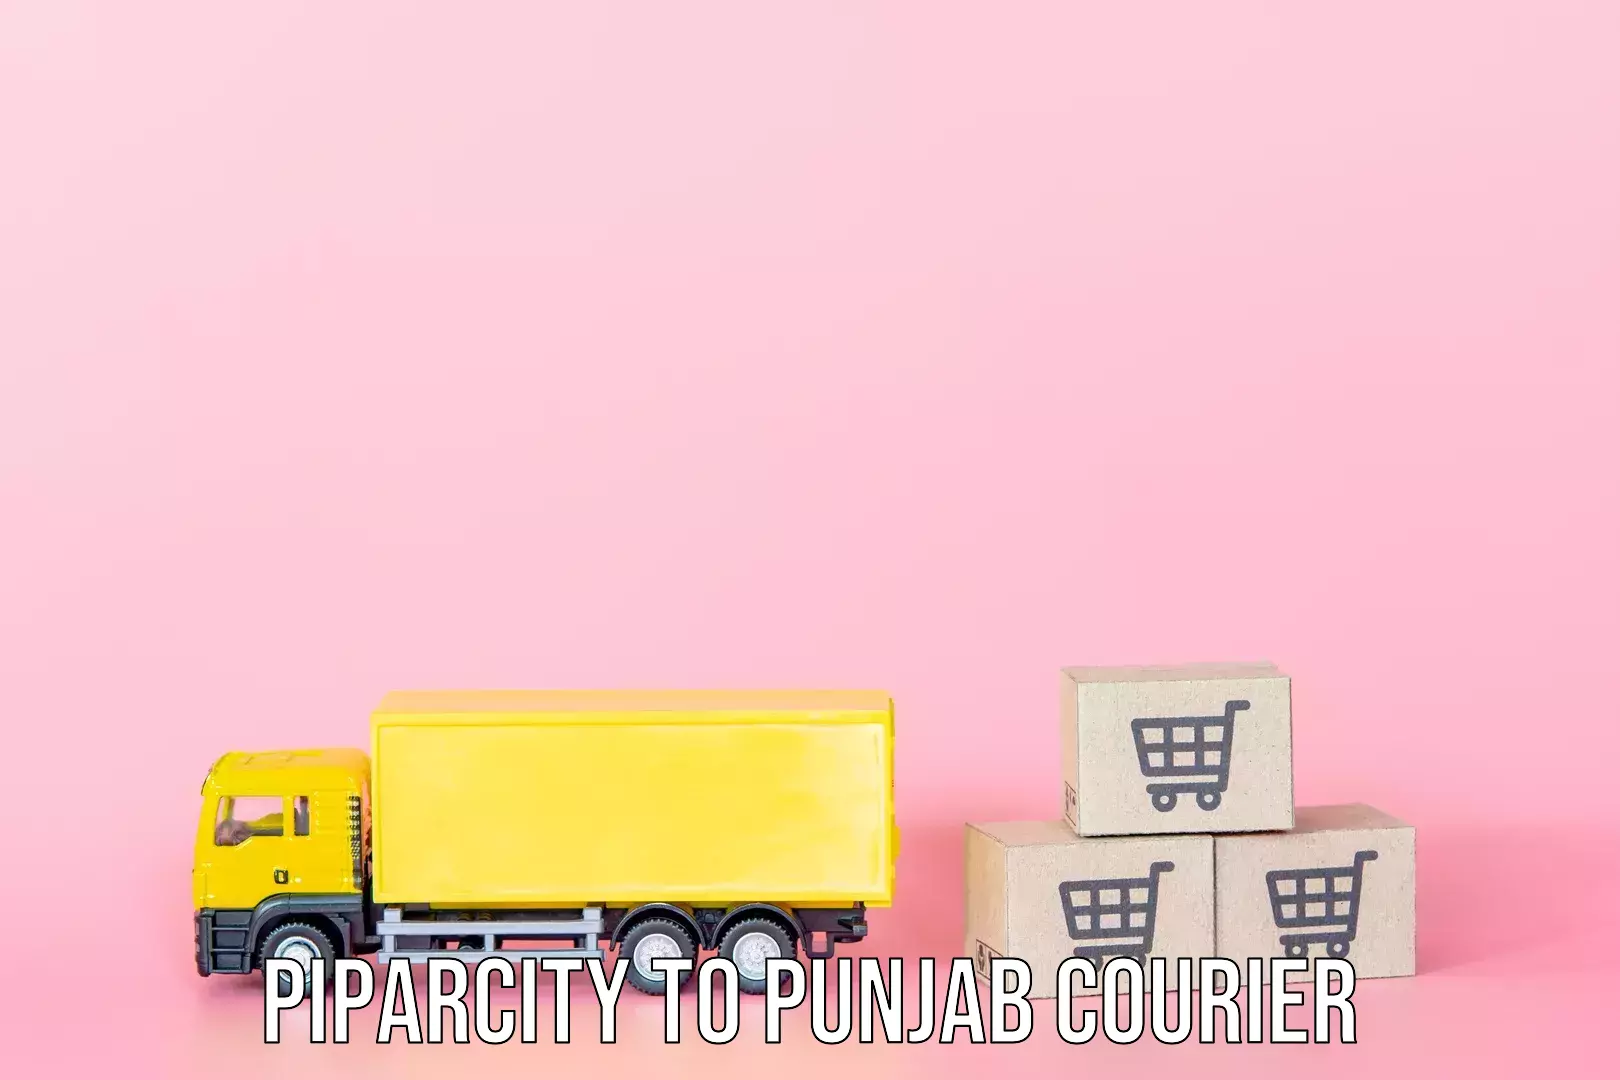 Luggage shipping planner Piparcity to Punjab